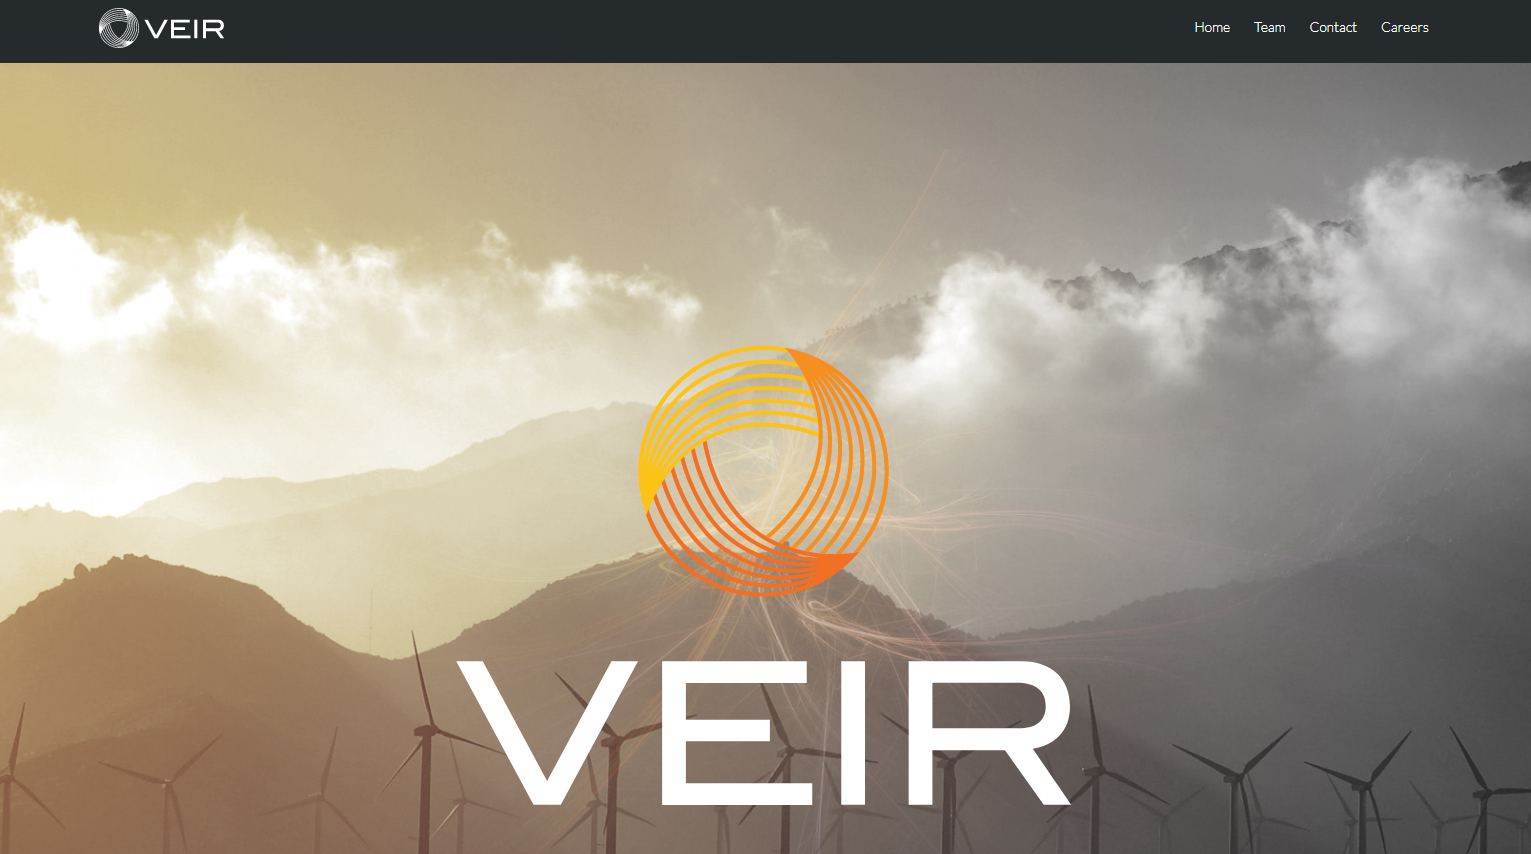 VEIR Raises $24.9 Million in Series A Funding to Revolutionize High-Temperature Superconductor-based Transmission Lines